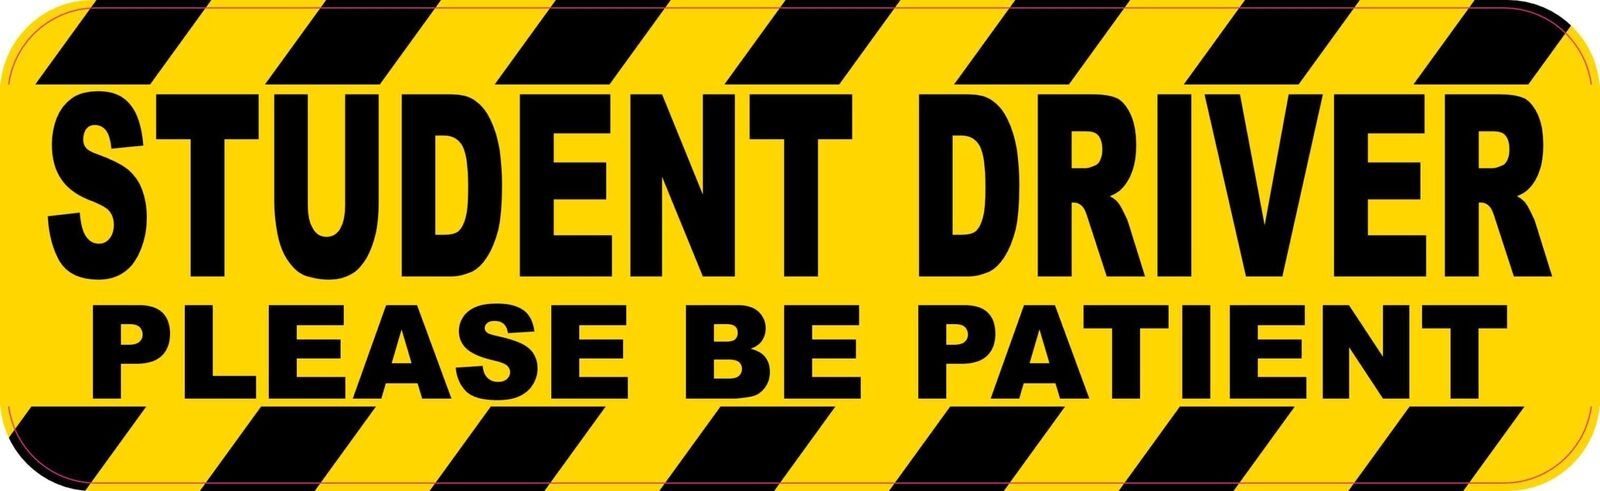 10in x 3in Please Be Patient Student Driver Vinyl Sticker Vehicle Bumper Decal